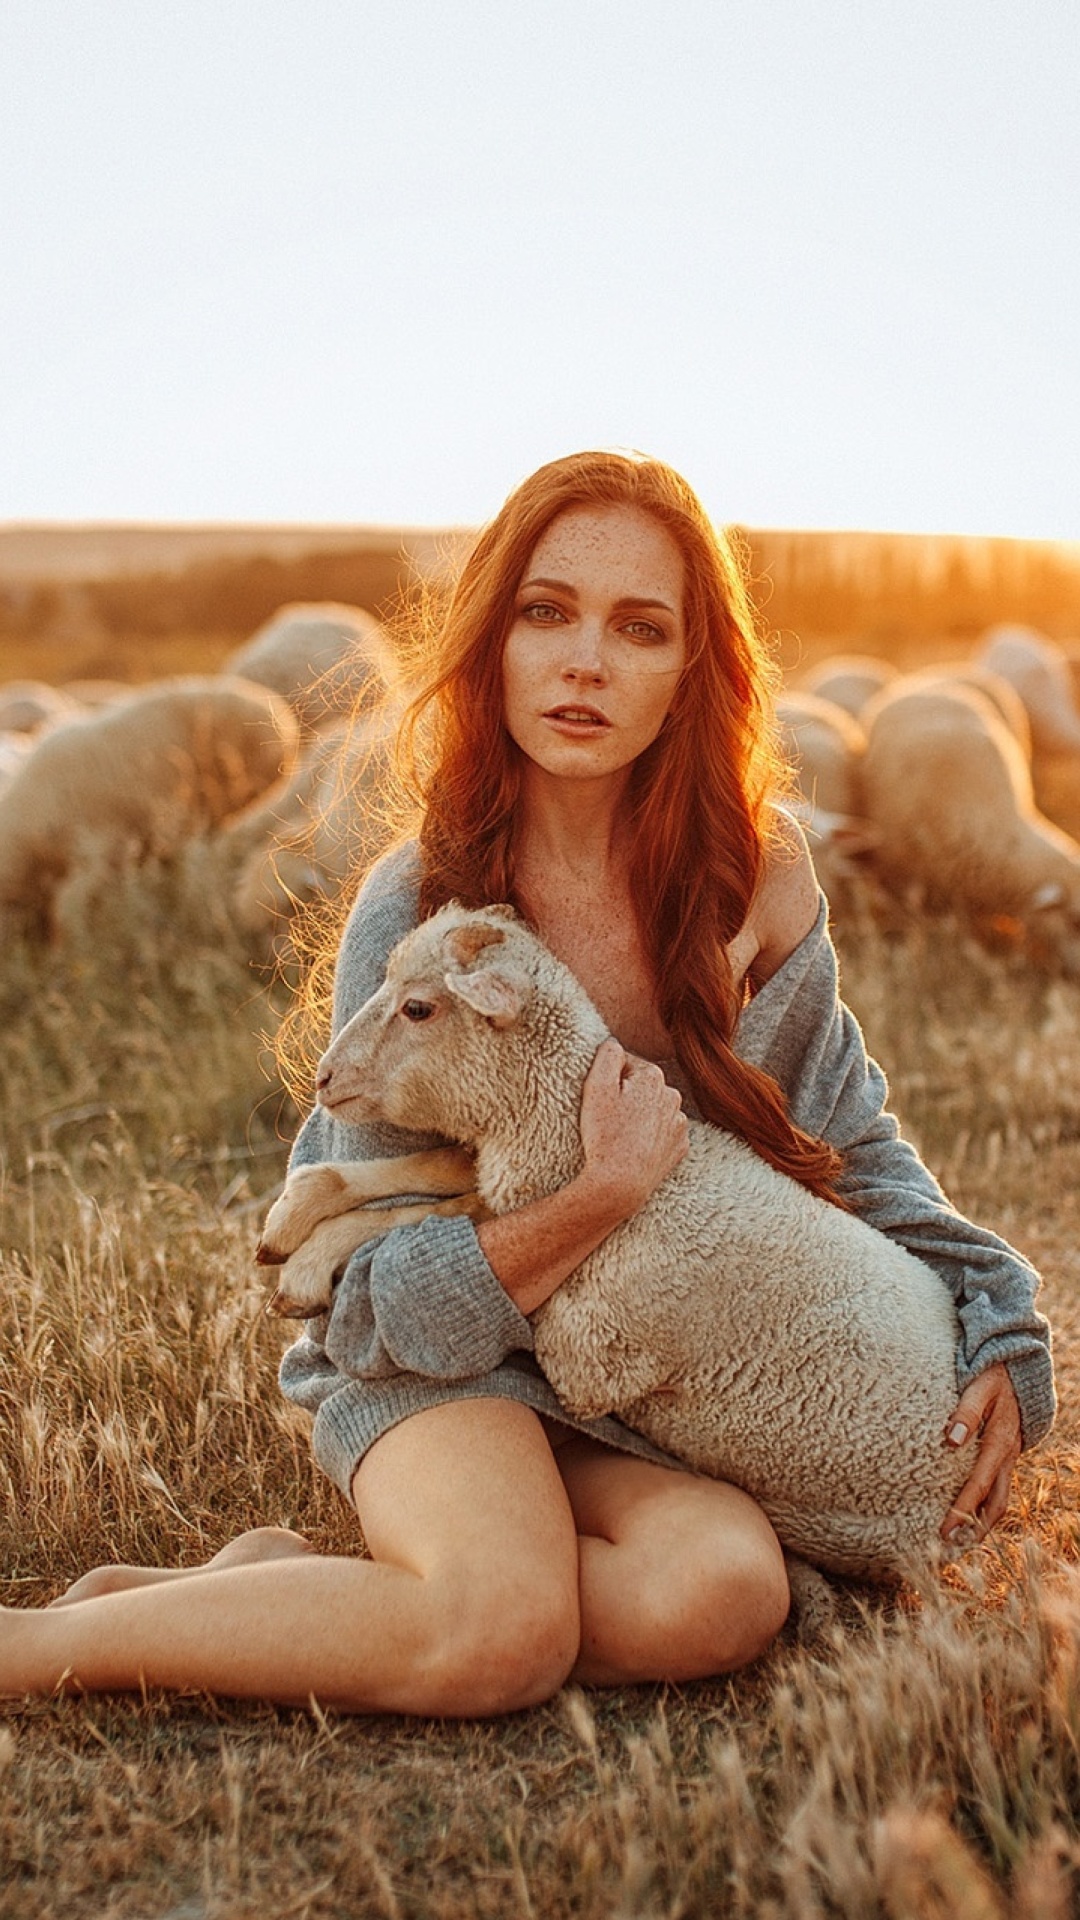 Girl with Sheep wallpaper 1080x1920